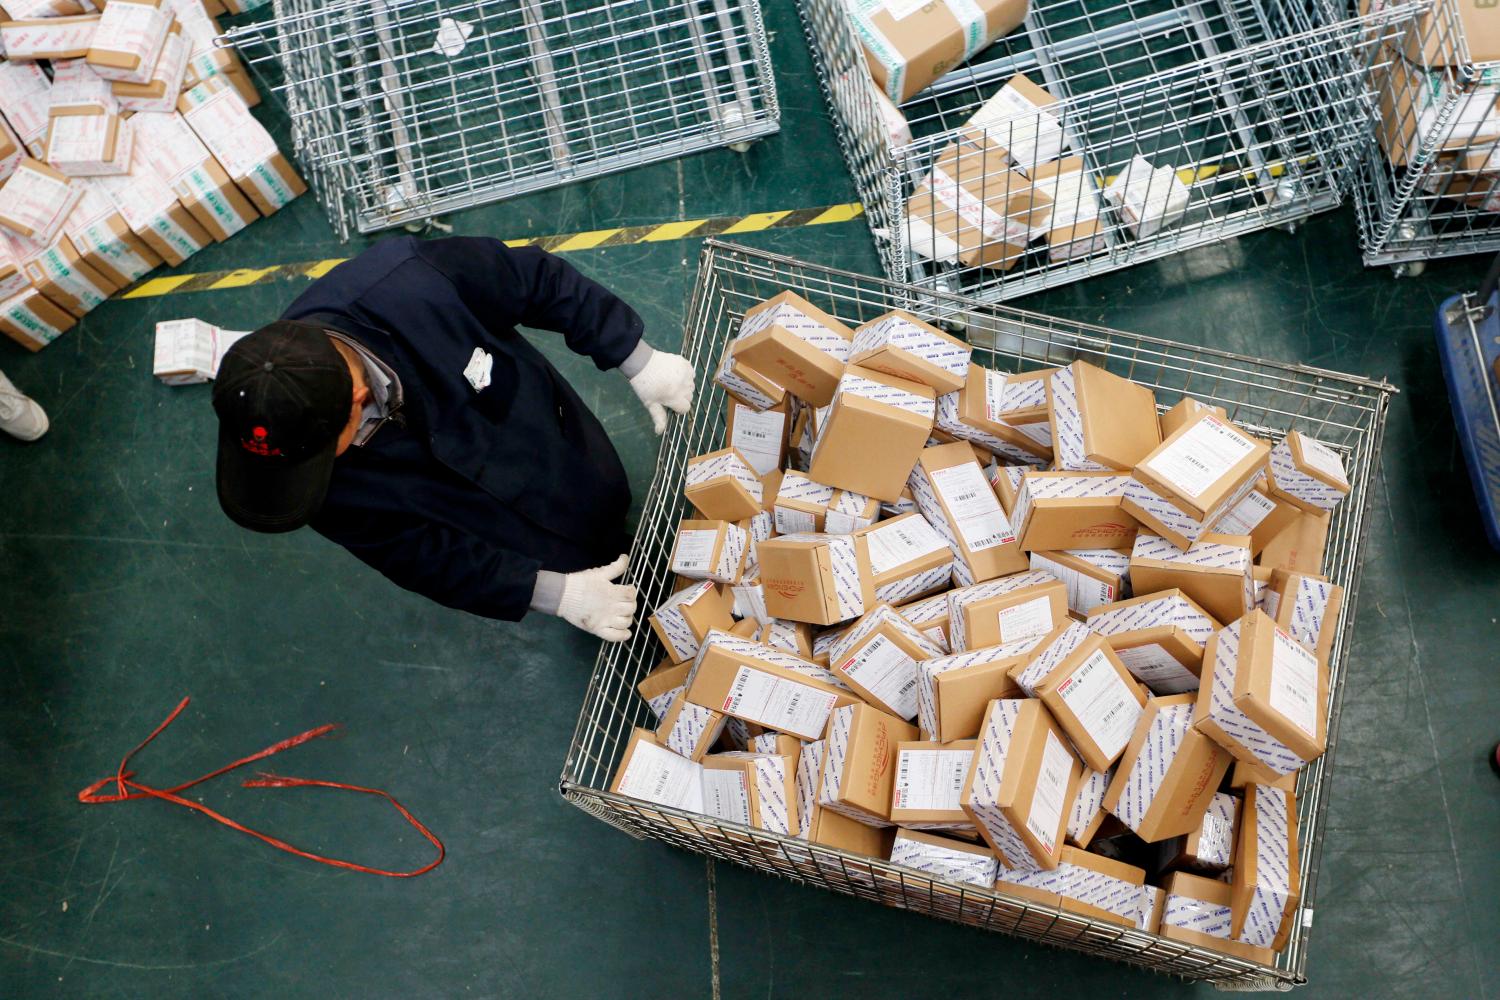 A Chinese worker carts parcels, most of which are from online shopping, at the warehouse of an e-commerce company.